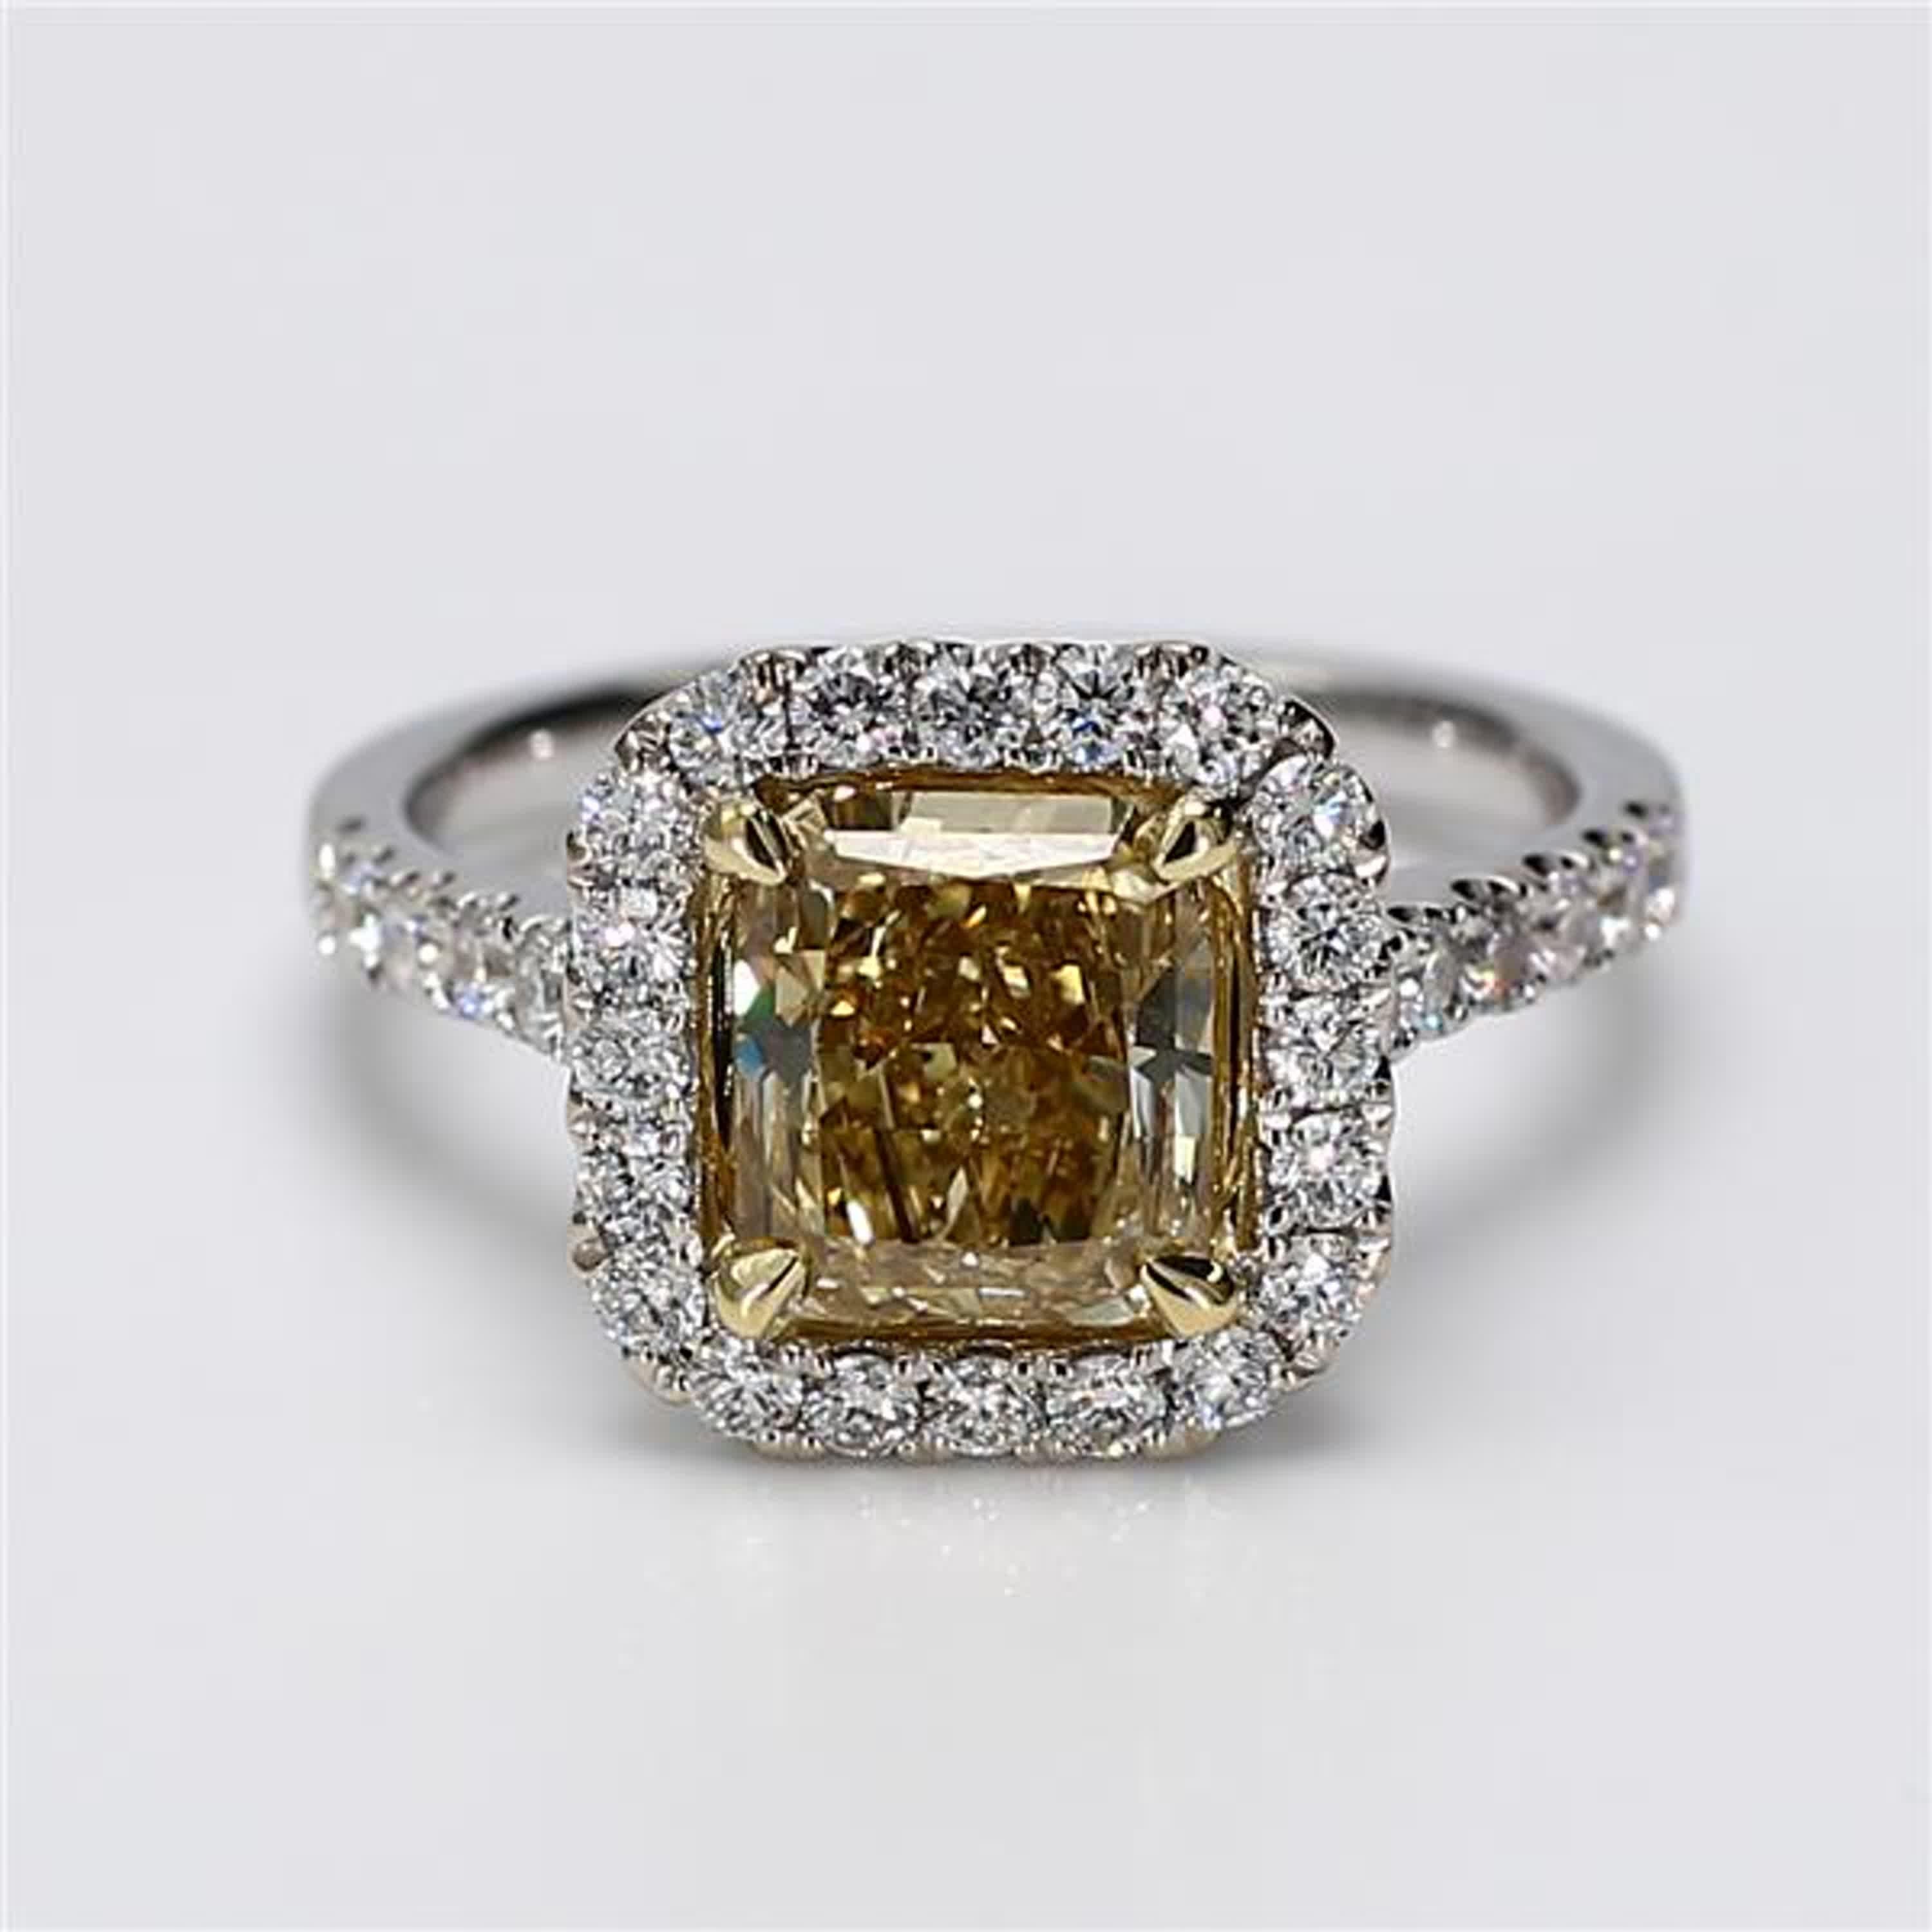 RareGemWorld's classic diamond ring. Mounted in a beautiful 18K Yellow and White Gold setting with a natural radiant cut yellow diamond. The yellow diamond is surrounded by round natural white diamond melee. This ring is guaranteed to impress and